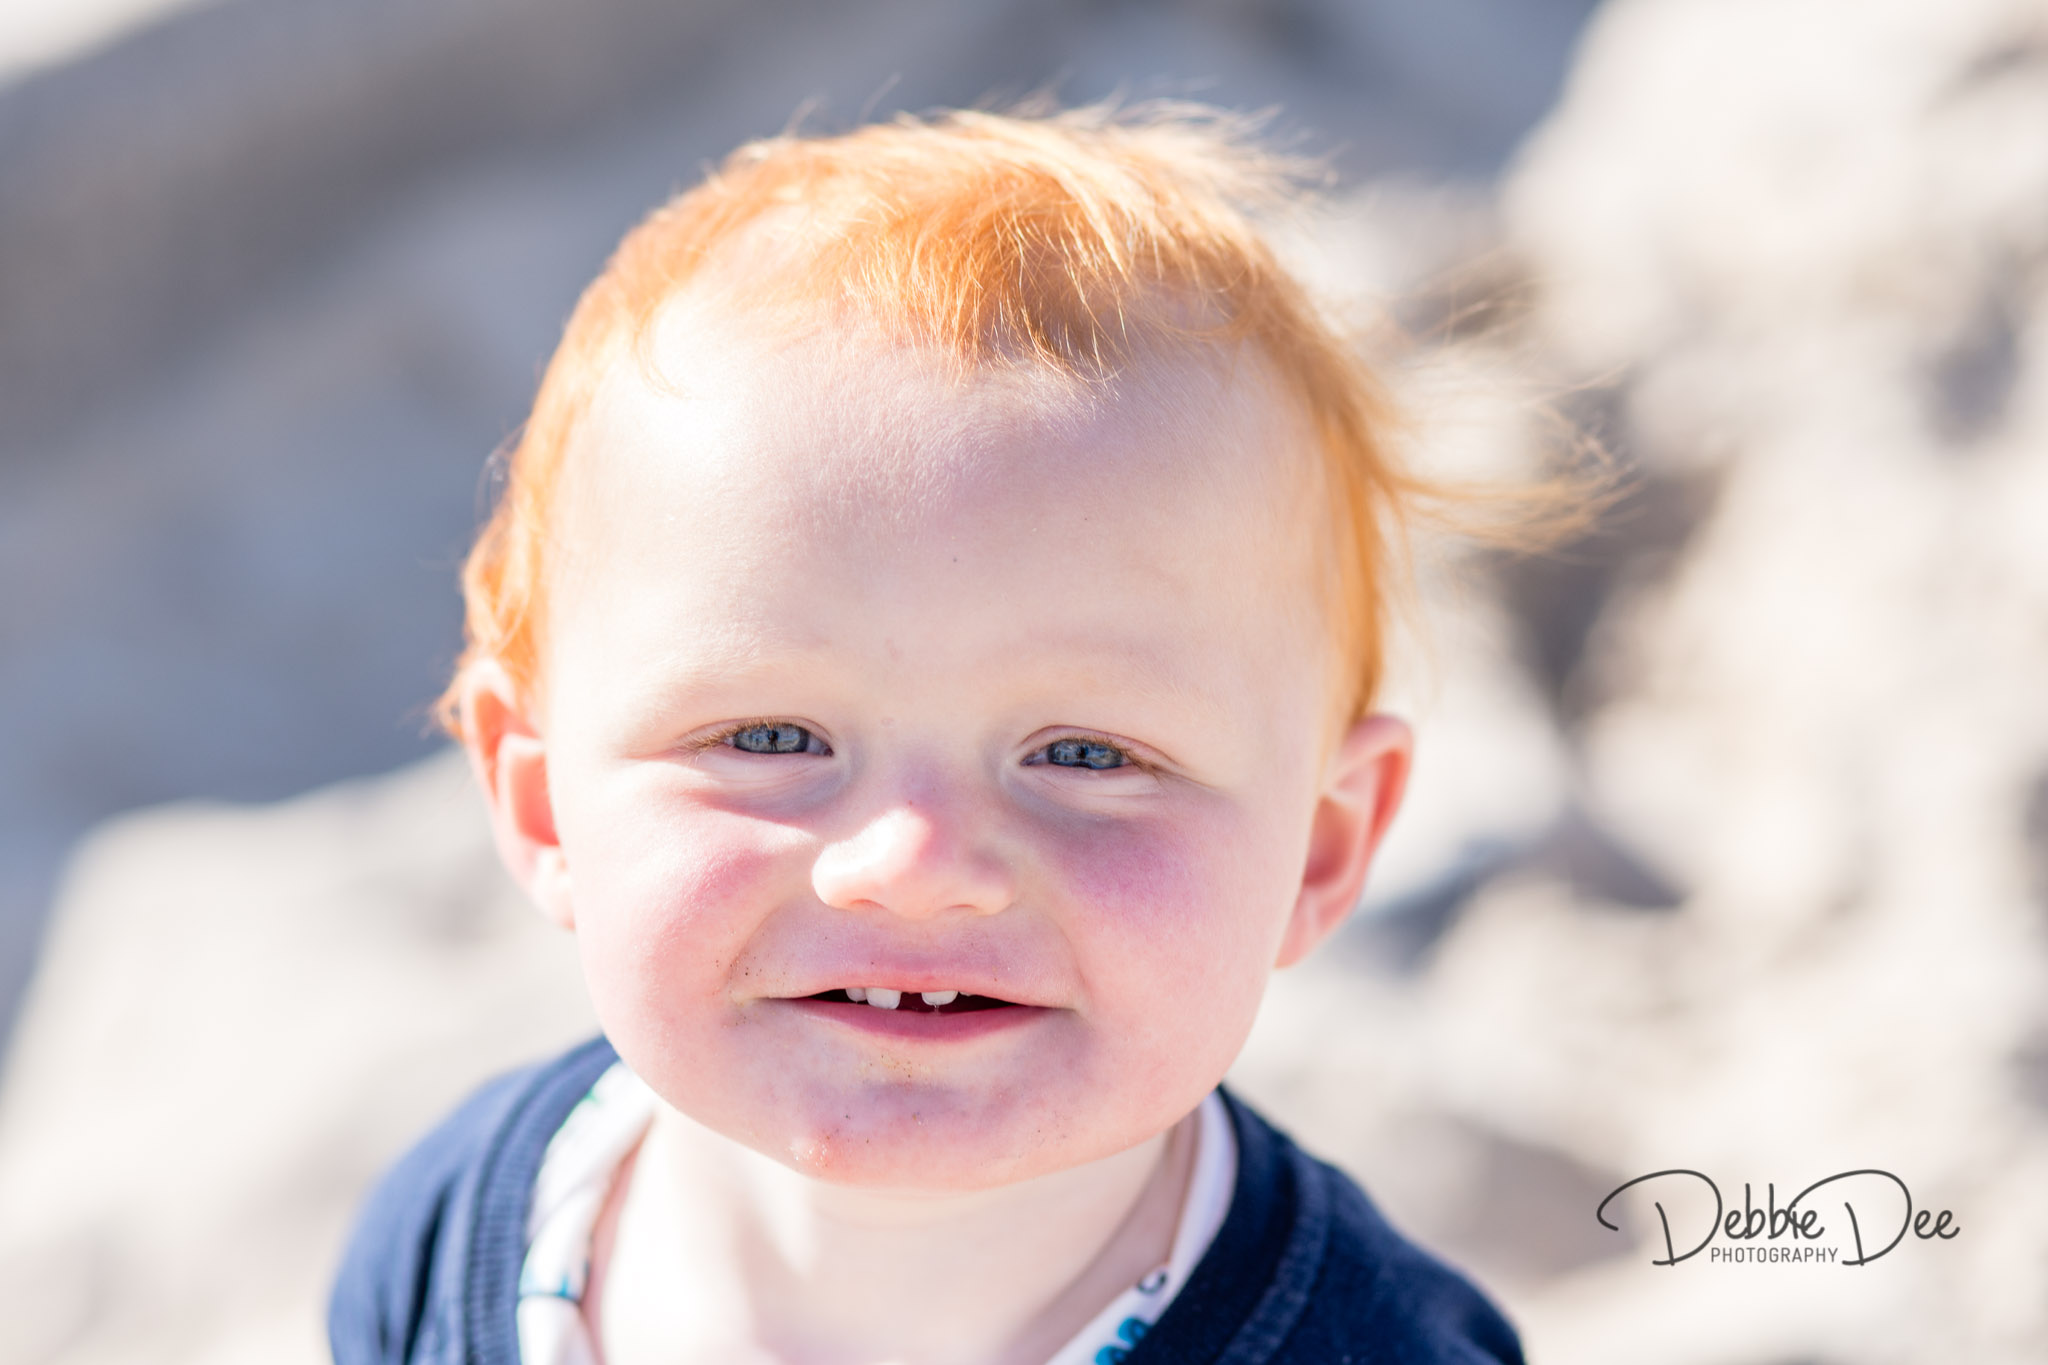 Family photography session banff beach aberdeenshire Debbie Dee Photography boy smiling